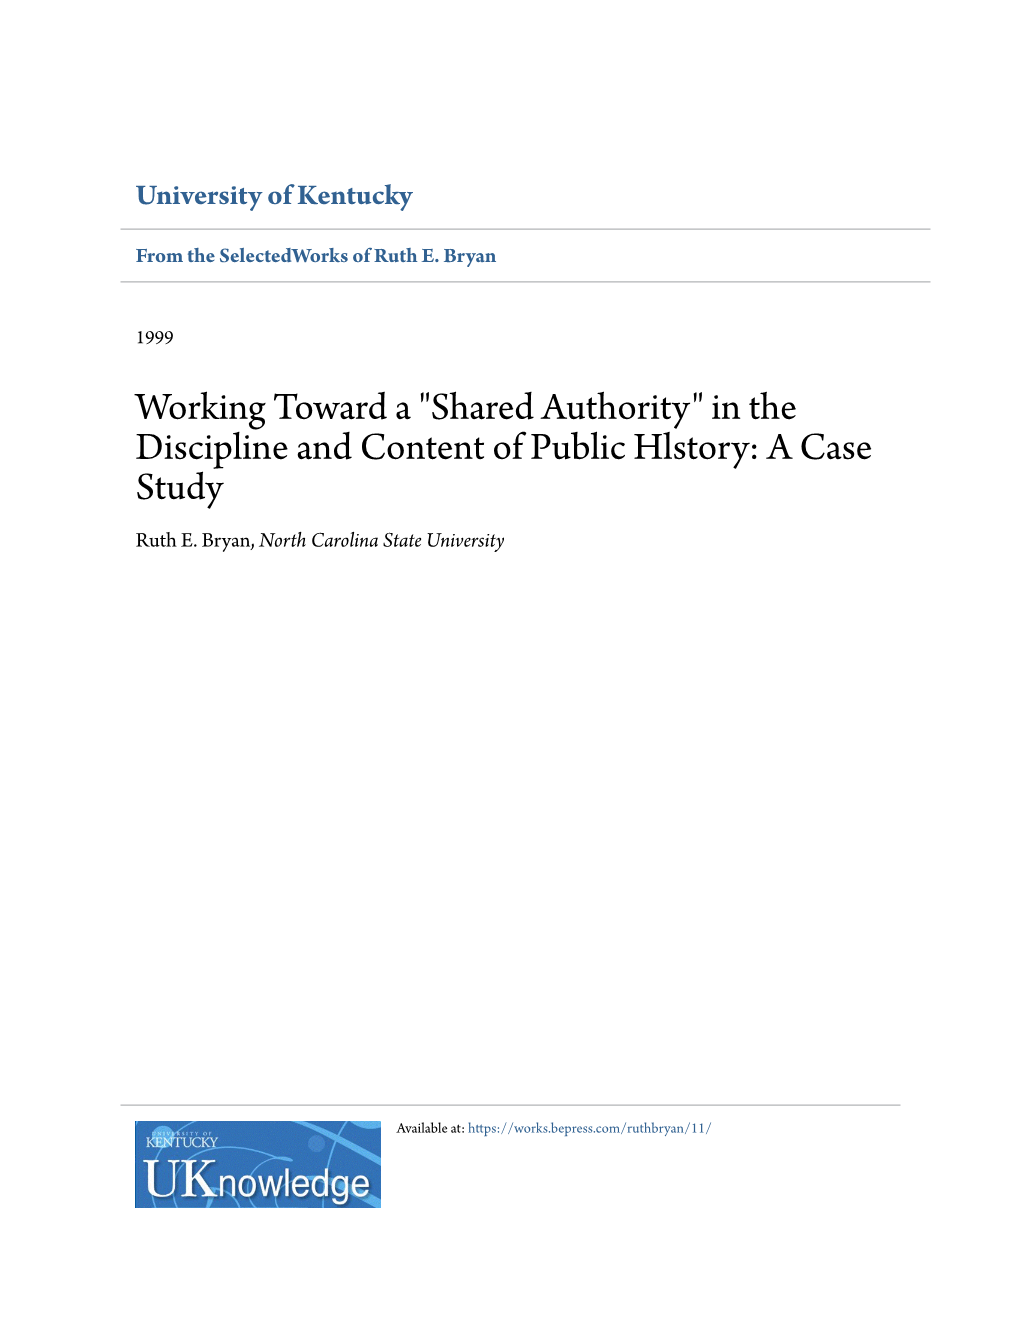 "Shared Authority" in the Discipline and Content of Public Hlstory: a Case Study Ruth E